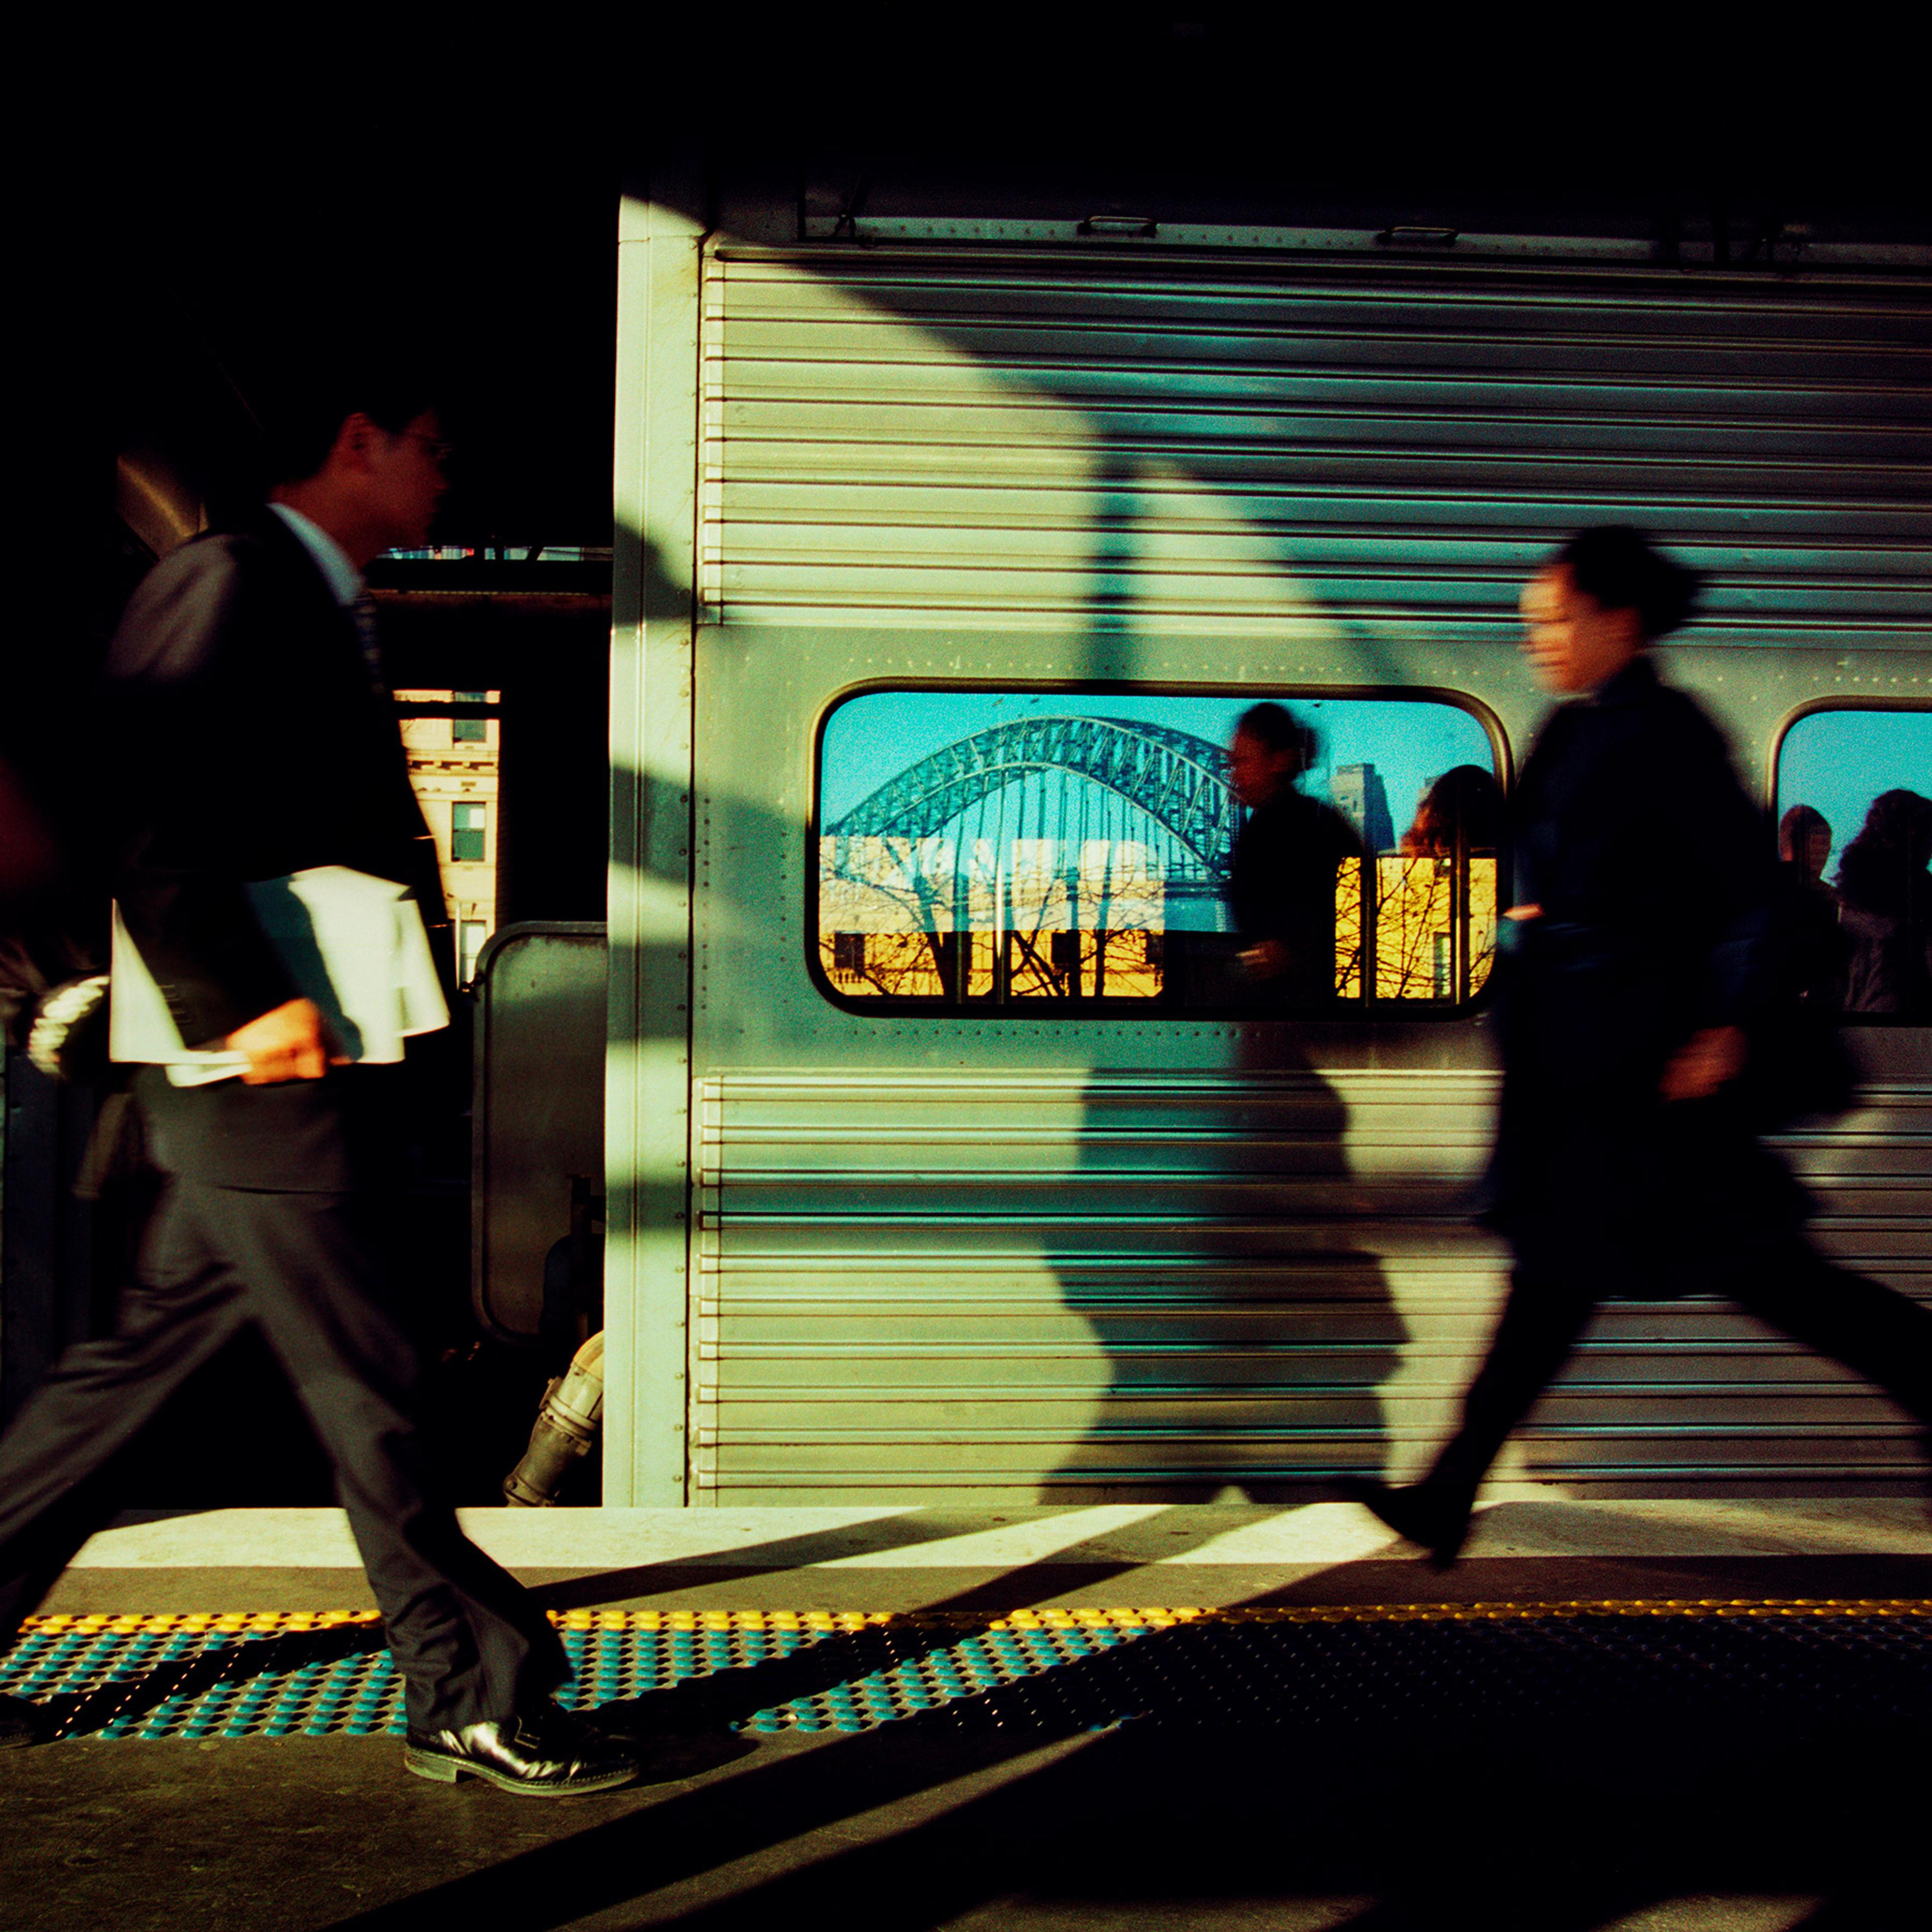 Commuters rush past a stationary commuter train. In the train window is reflected the Sydney Harbour Bridge